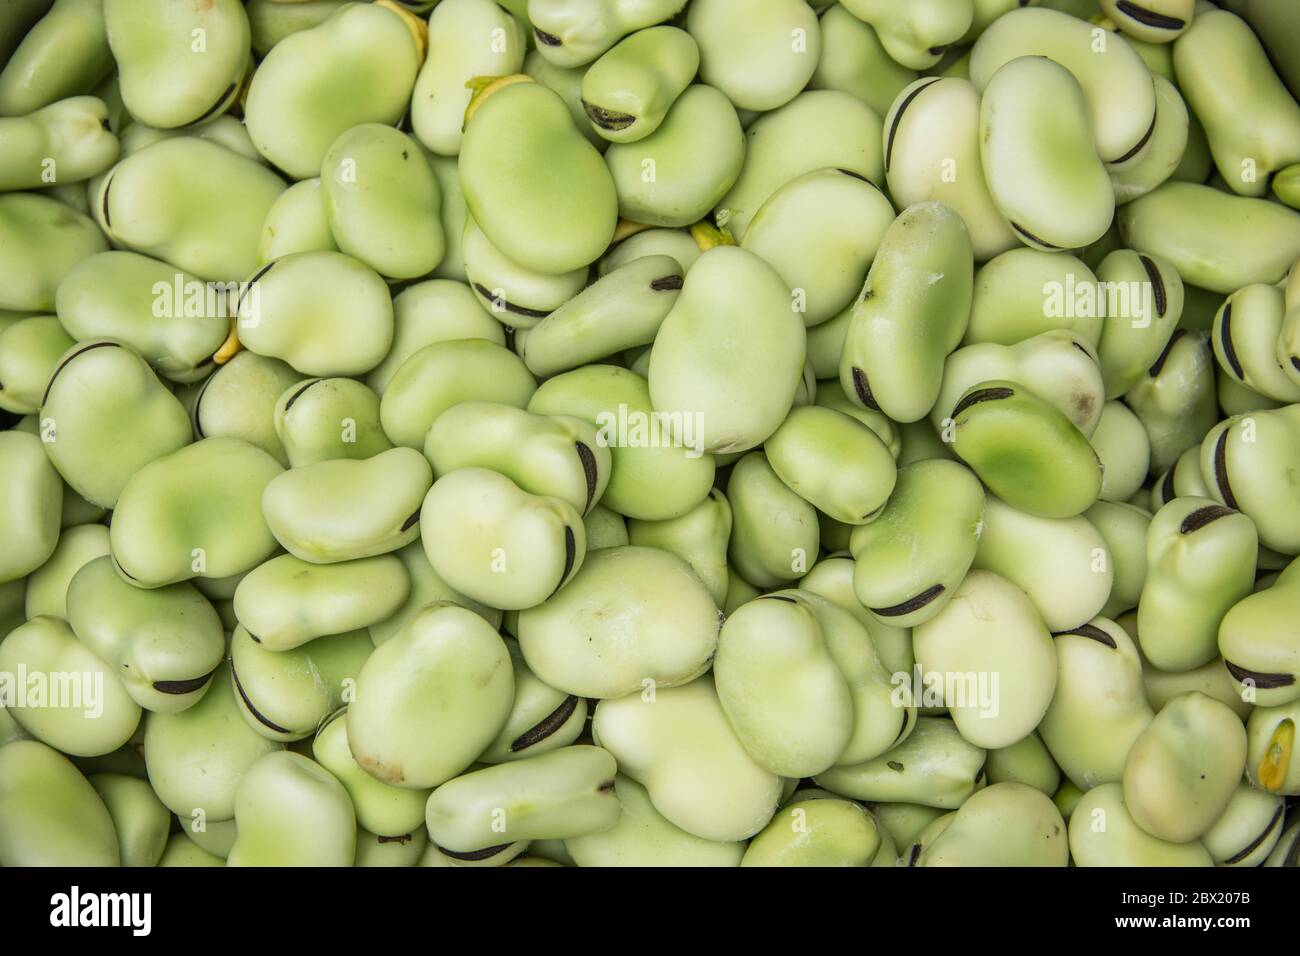 London, UK. 4 June, 2020. An Allotment crop of broad beans after shelling from their pods. David Rowe/Alamy Stock image. Stock Photo